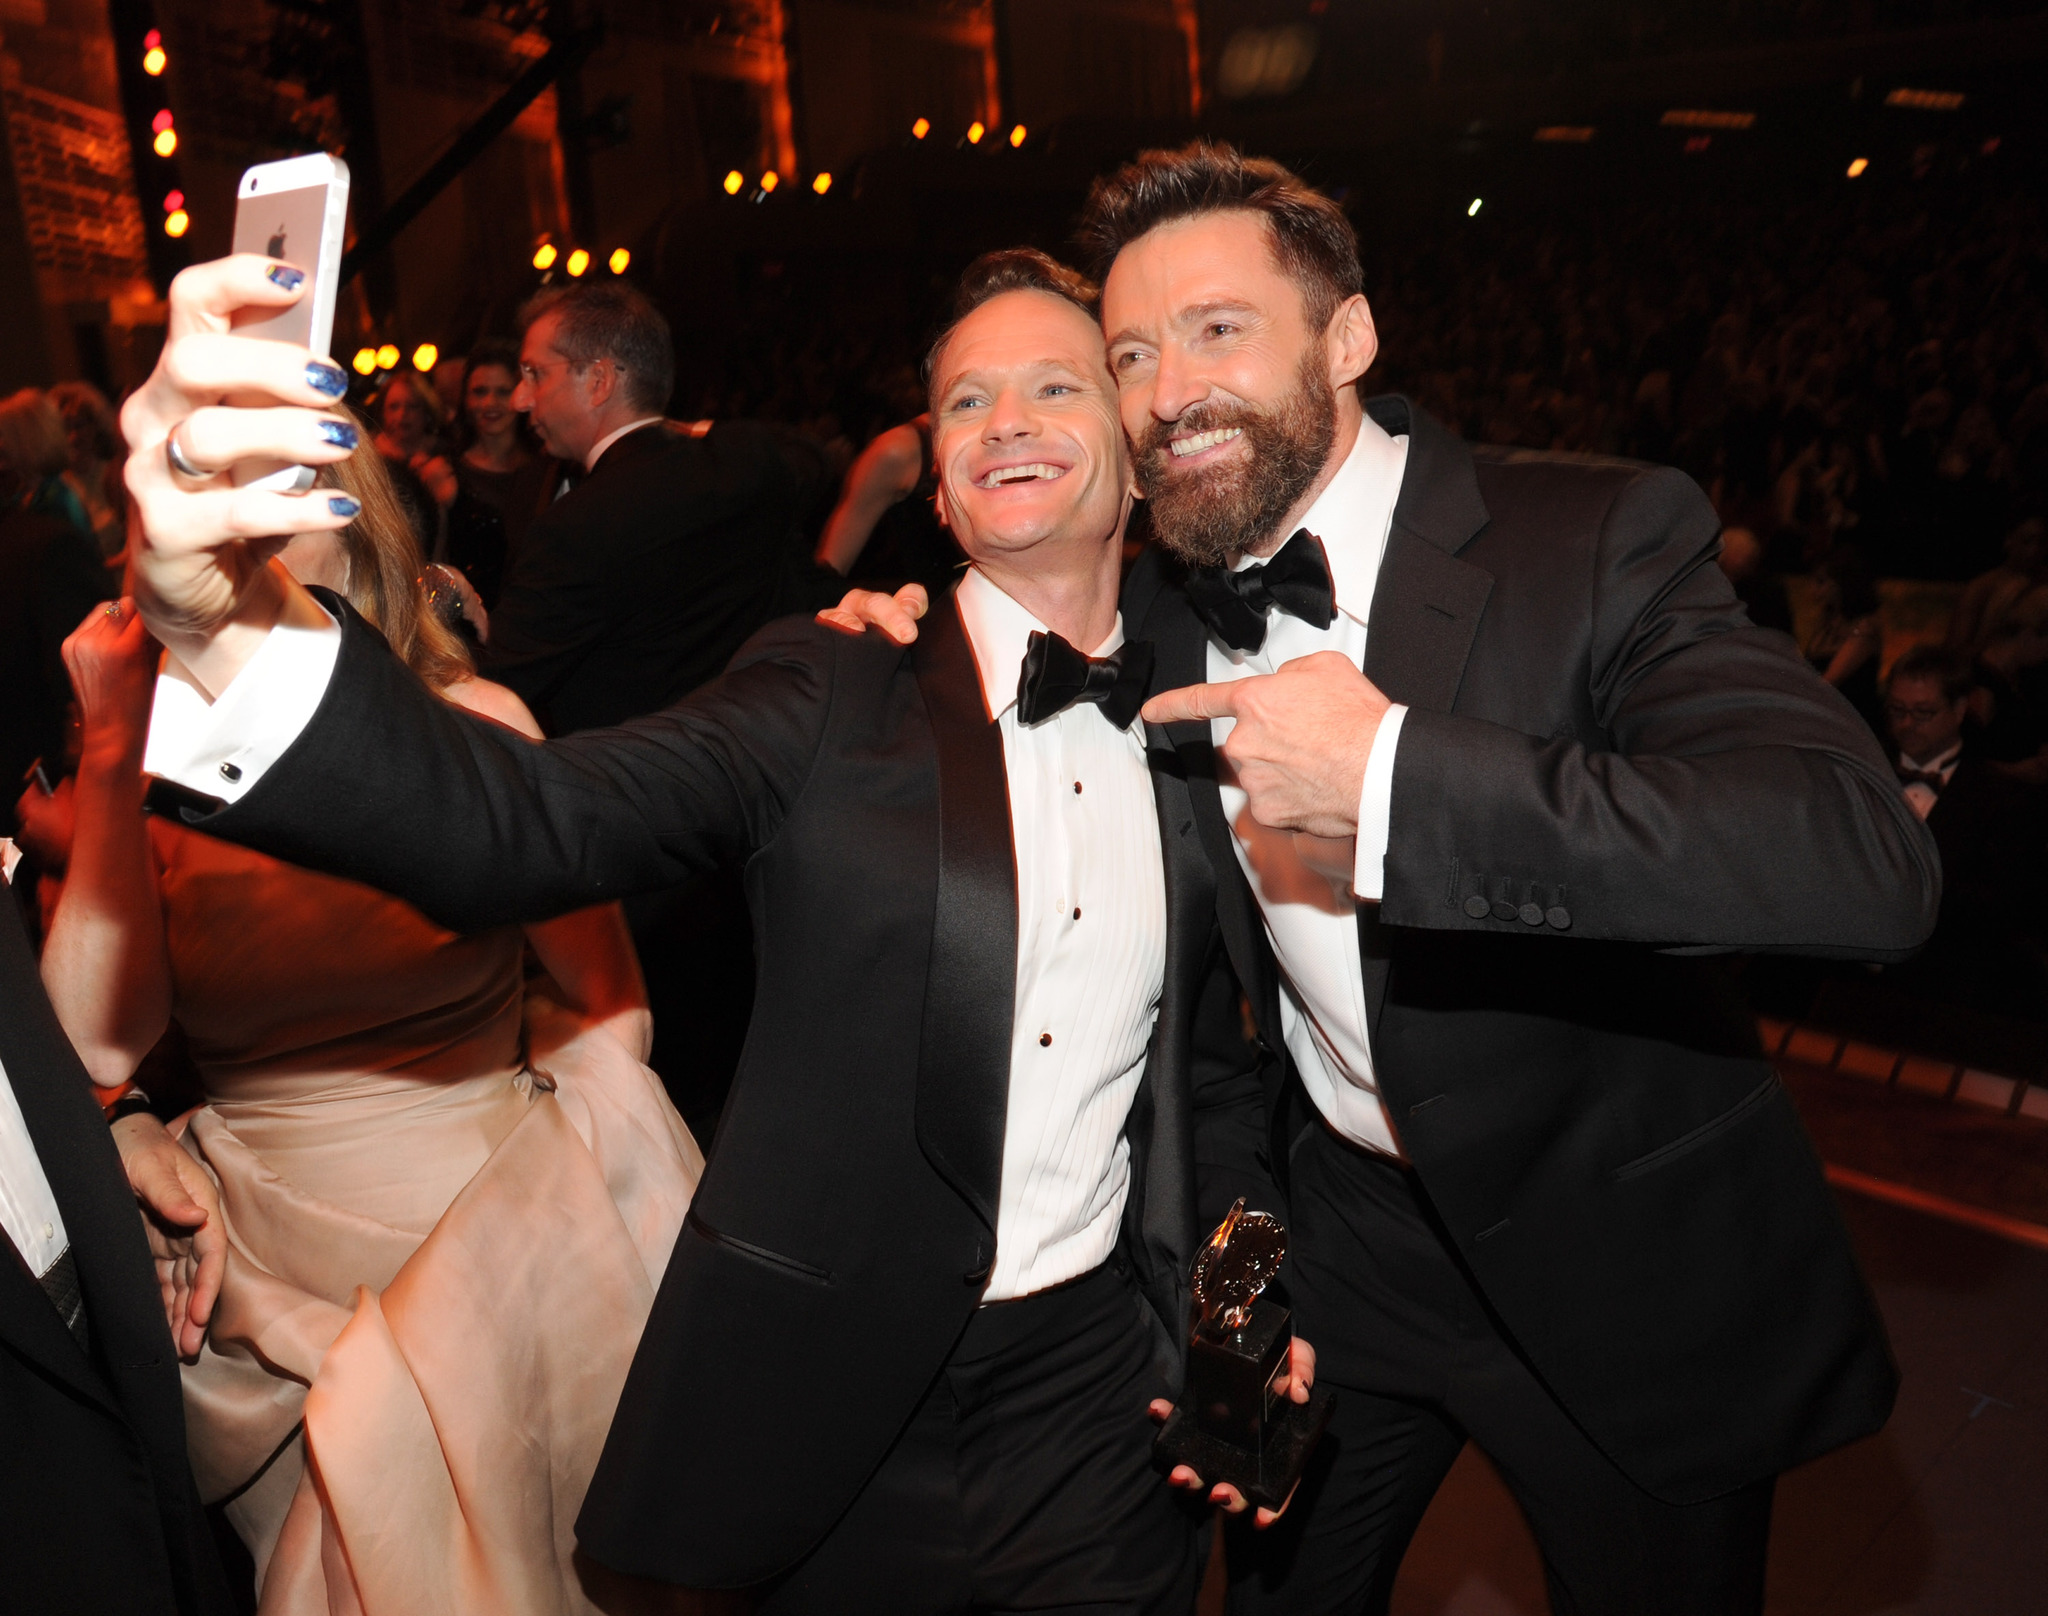 Neil Patrick Harris and Hugh Jackman attend the 68th Annual Tony Awards at Radio City Music Hall on June 8, 2014 in New York City.